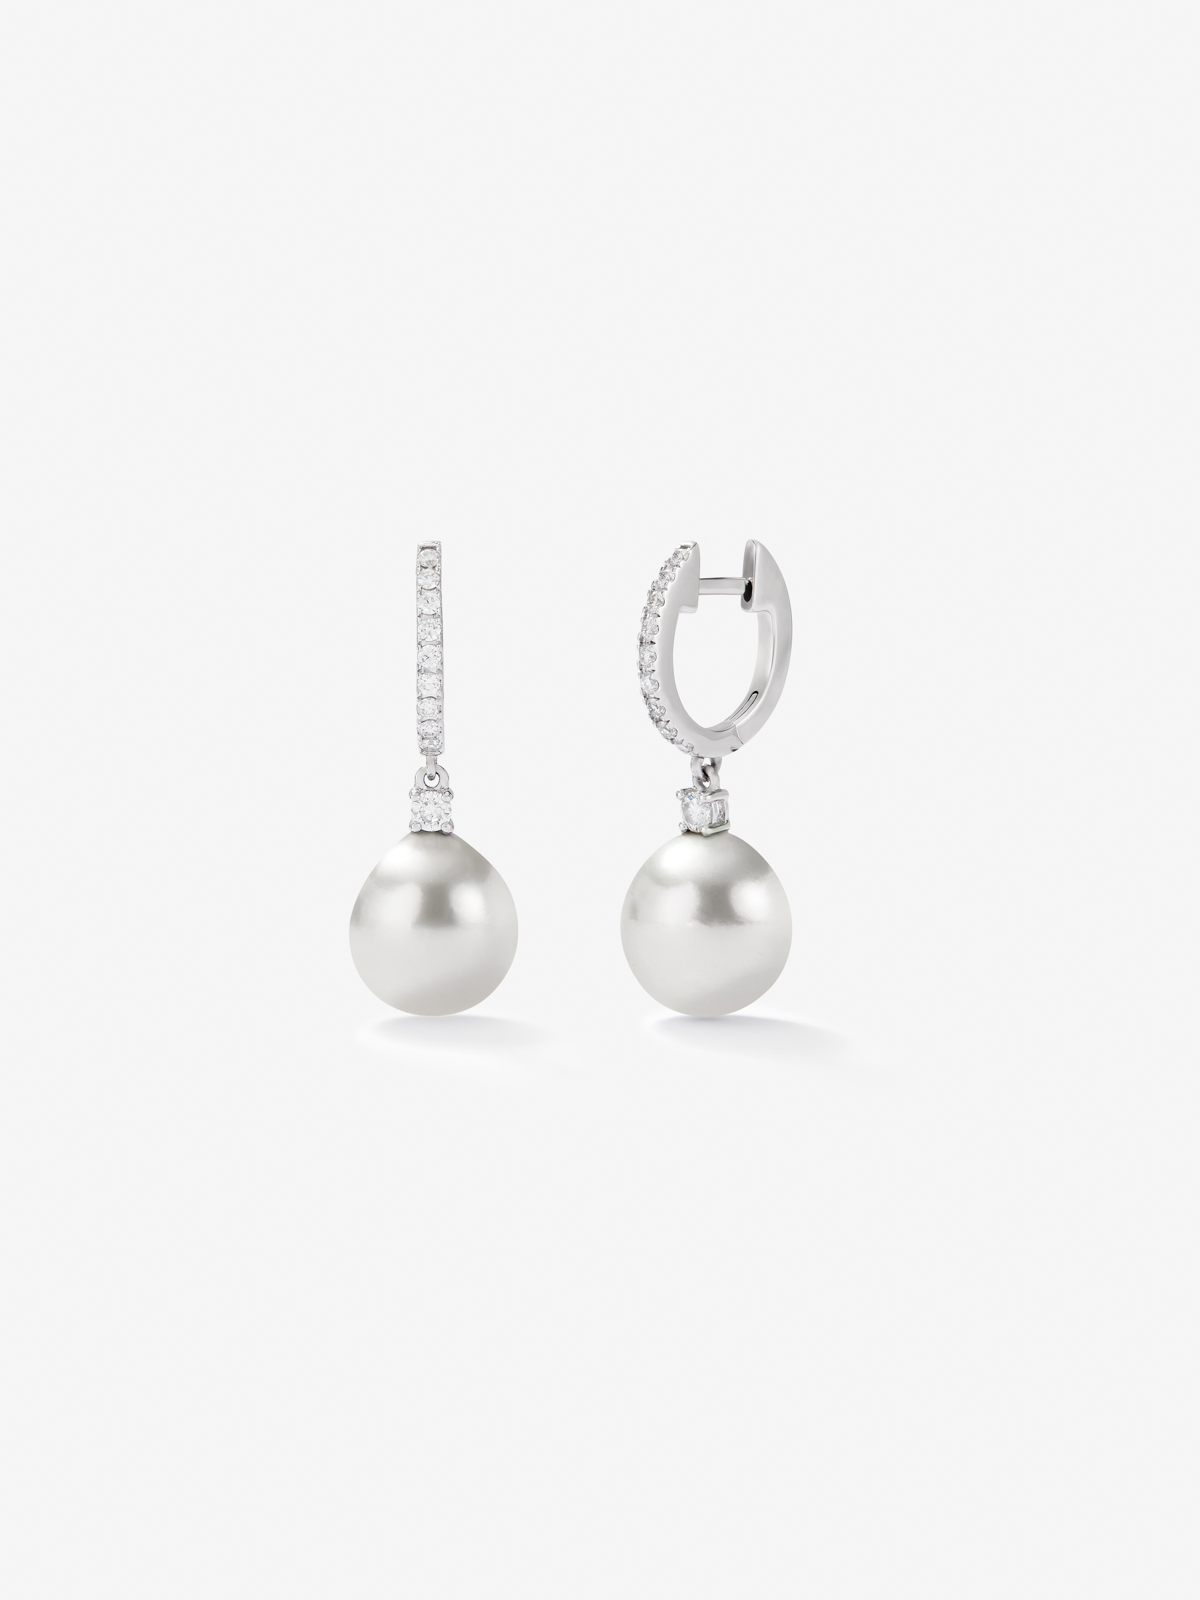 18K white gold earrings with 9 mm Australian pearls and diamonds in bright 0.31 cts